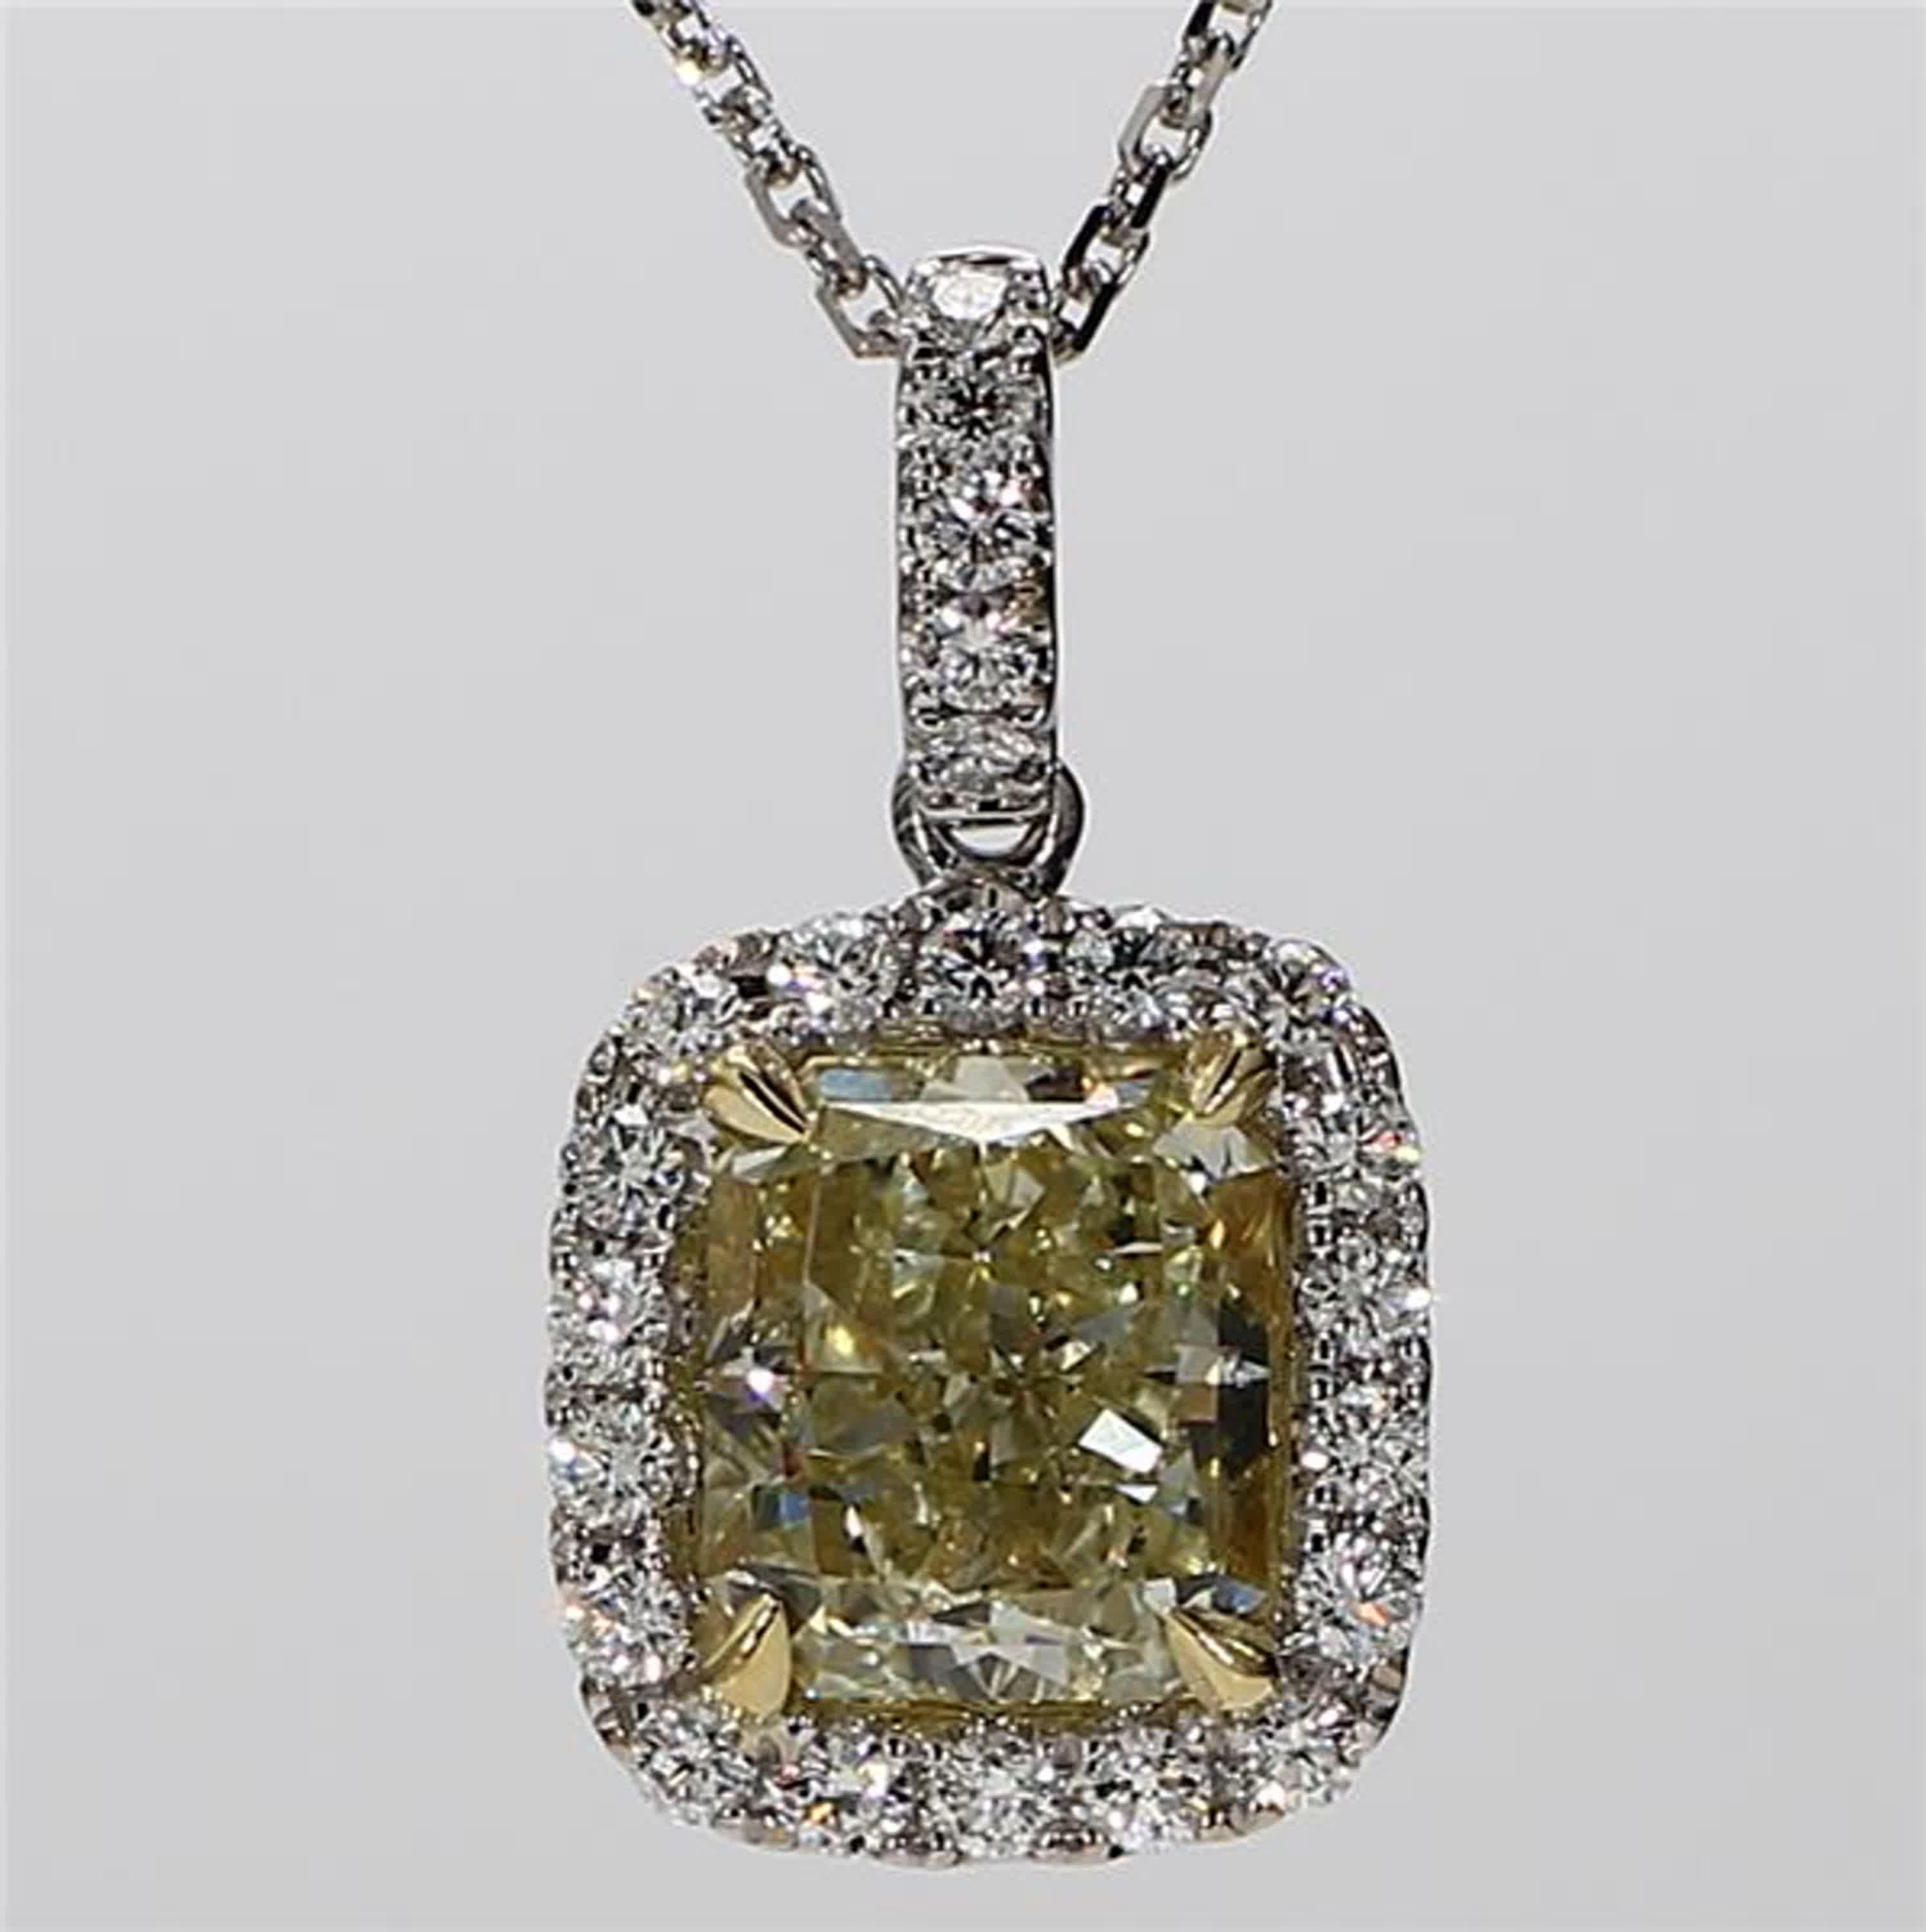 RareGemWorld's classic GIA certified diamond pendant. Mounted in a beautiful 18K Yellow and White Gold setting with natural radiant cut yellow diamonds. The yellow diamonds are surrounded by round natural white diamond melee. This necklace is